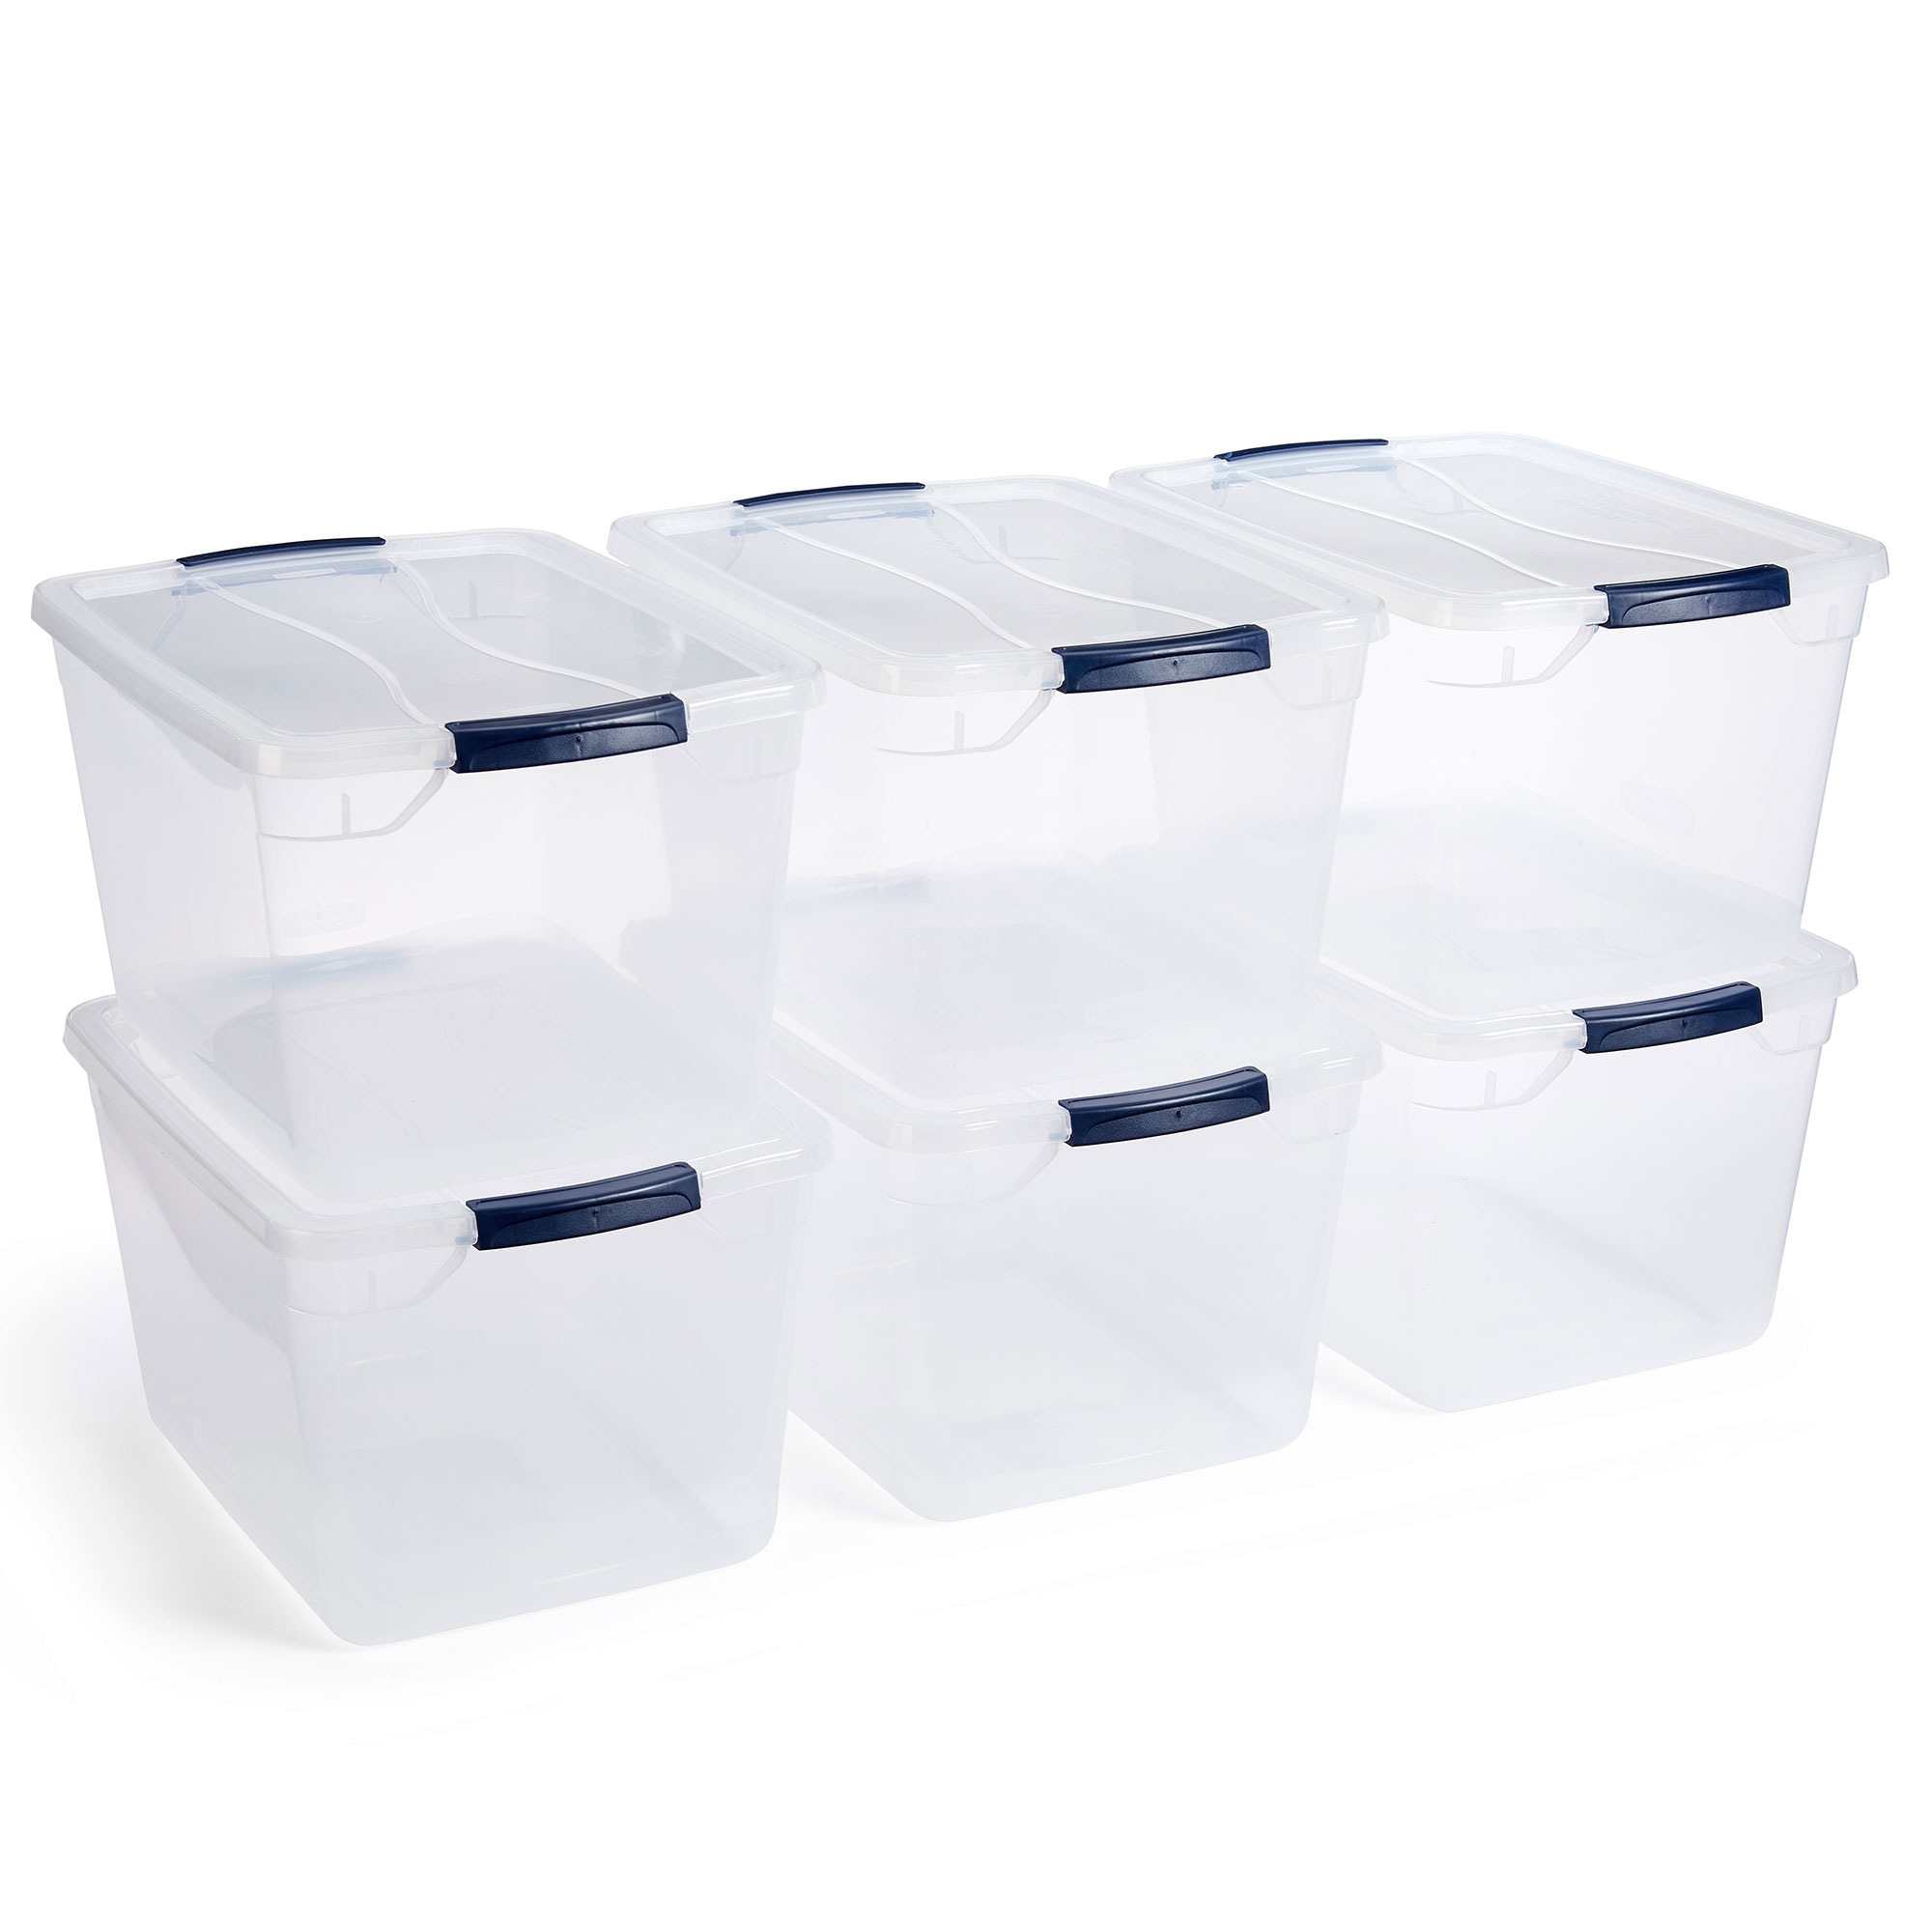 Homz 6610BKTS.10 10 Gallon Durable Molded Plastic Storage Bin With Secure  Lid & Reviews